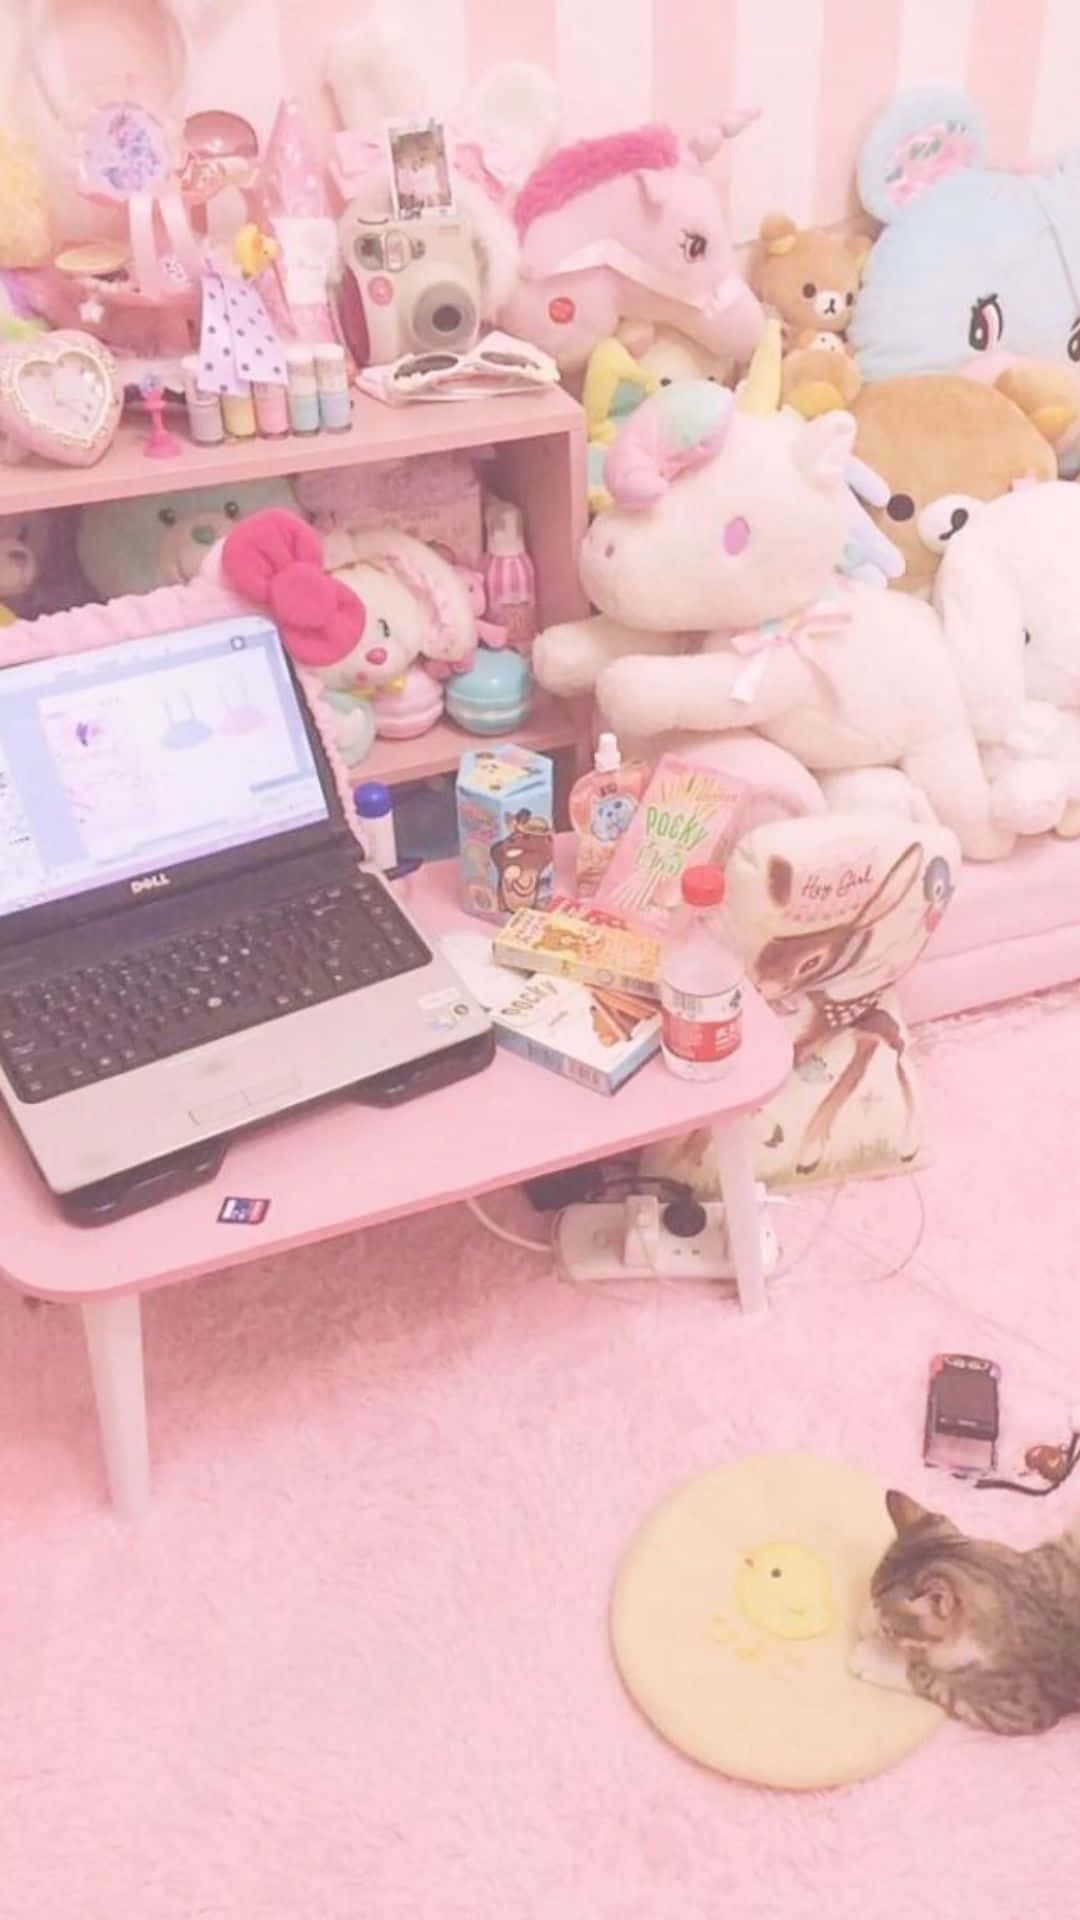 A spacious and charming Kawaii-inspired room filled with adorable plushies, pastel colors, and cute decorations. Wallpaper